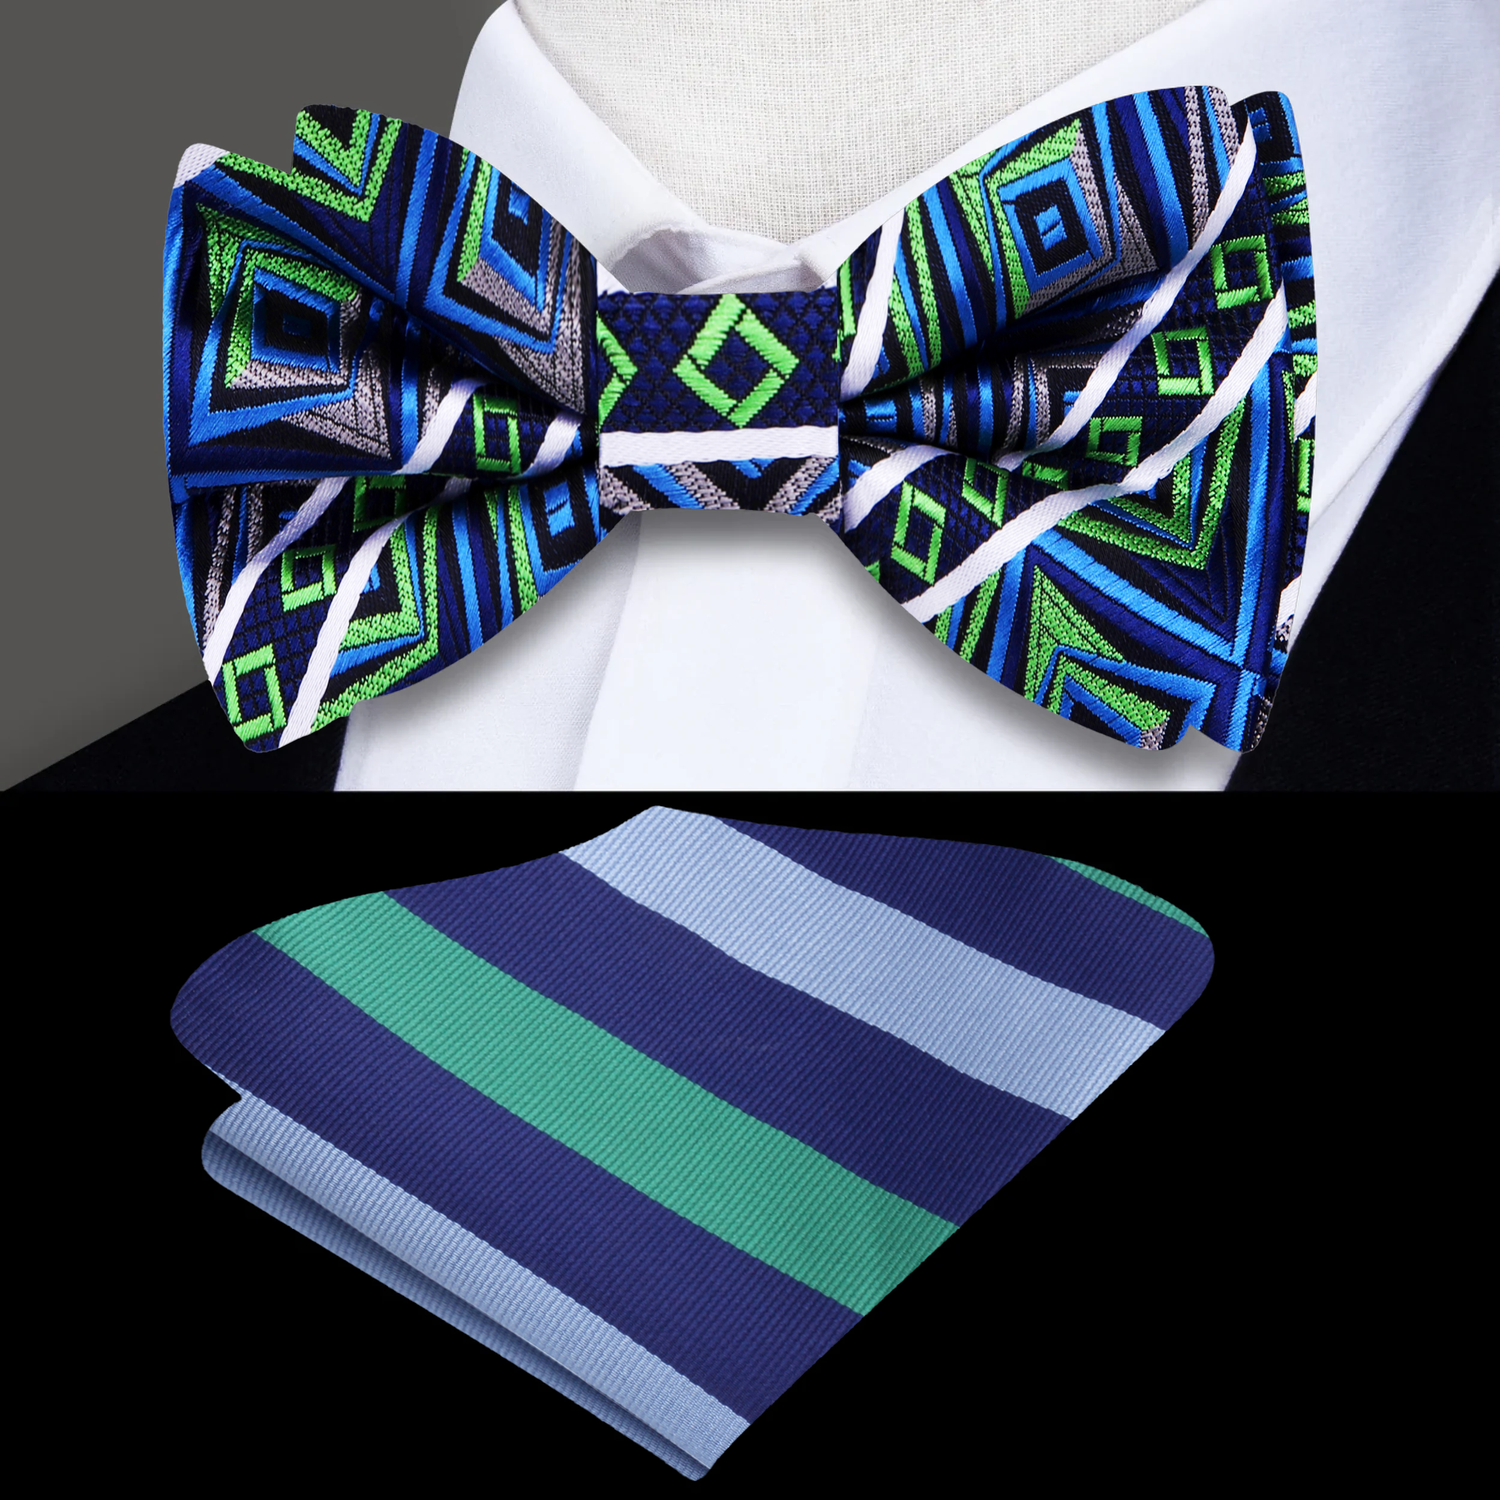 A Grey, Green, Blue Abstract Geometric Pattern Silk Pre Tied Bow Tie, Accenting Stripe Pocket Square